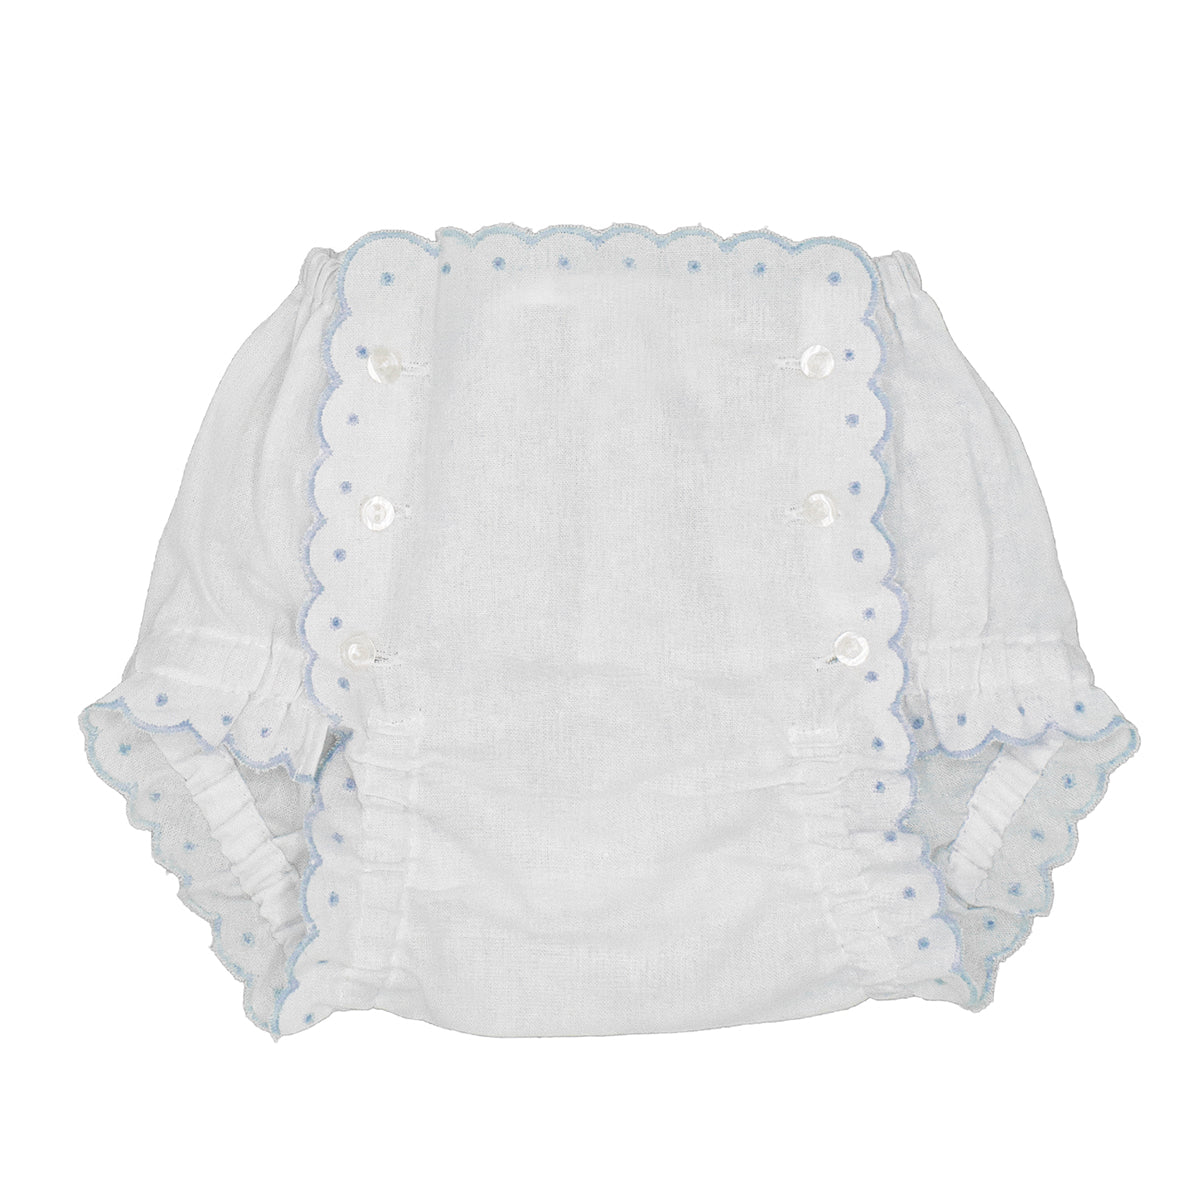 Baby Girl Diaper Cover White with Blue Scalloped Edge Button Bloomers